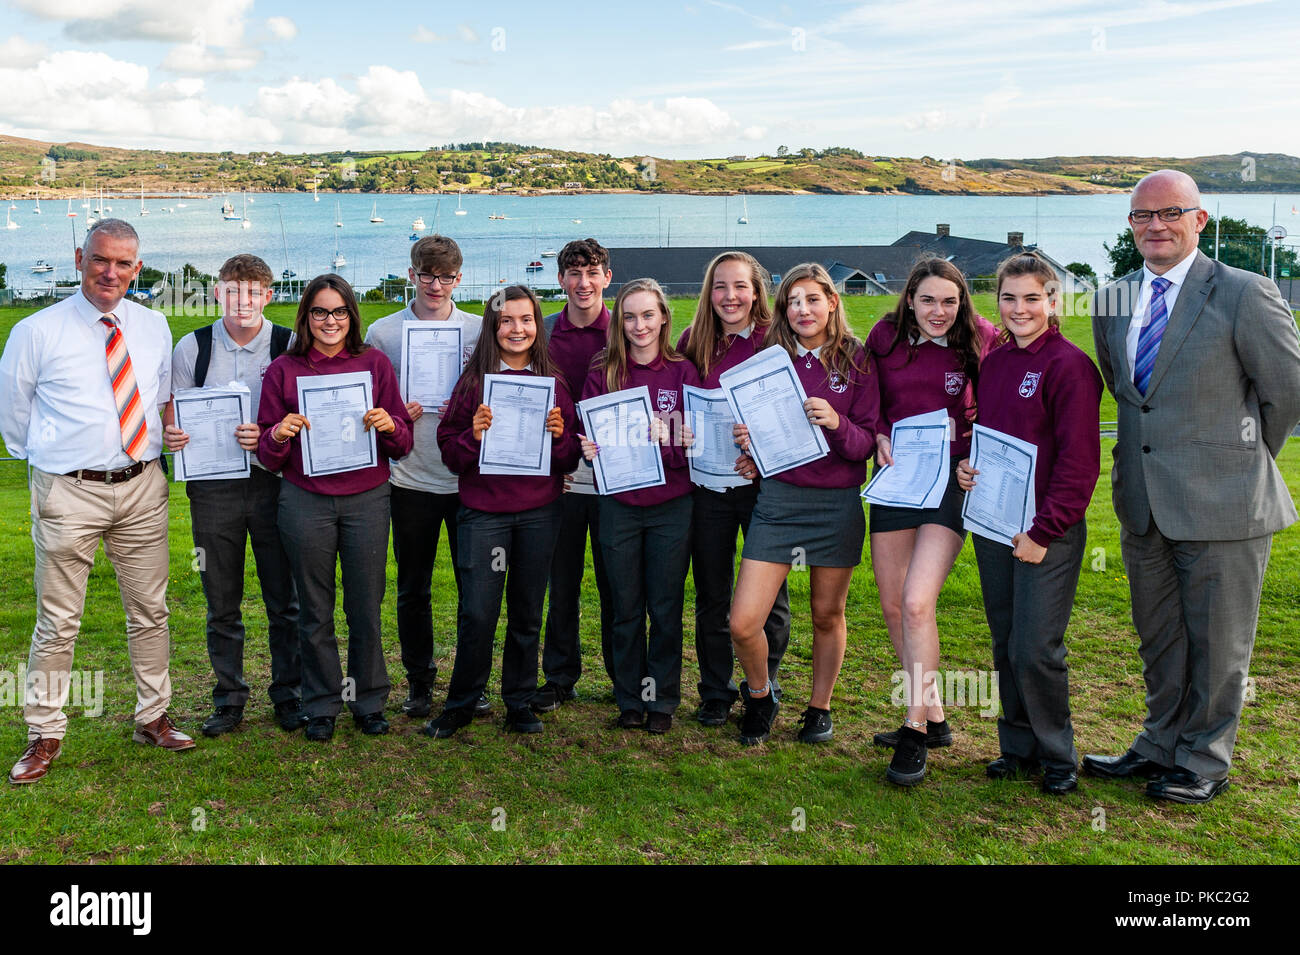 Schull, West Cork, Ireland. 12th Sept, 2018.  Over 62,500 students received their Junior Cert results today. School principal Brendan Drinan and vice-princioal Padraig O'Sullivan are pictured with some of the Junior Cert students. Credit: Andy Gibson/Alamy Live News. Stock Photo